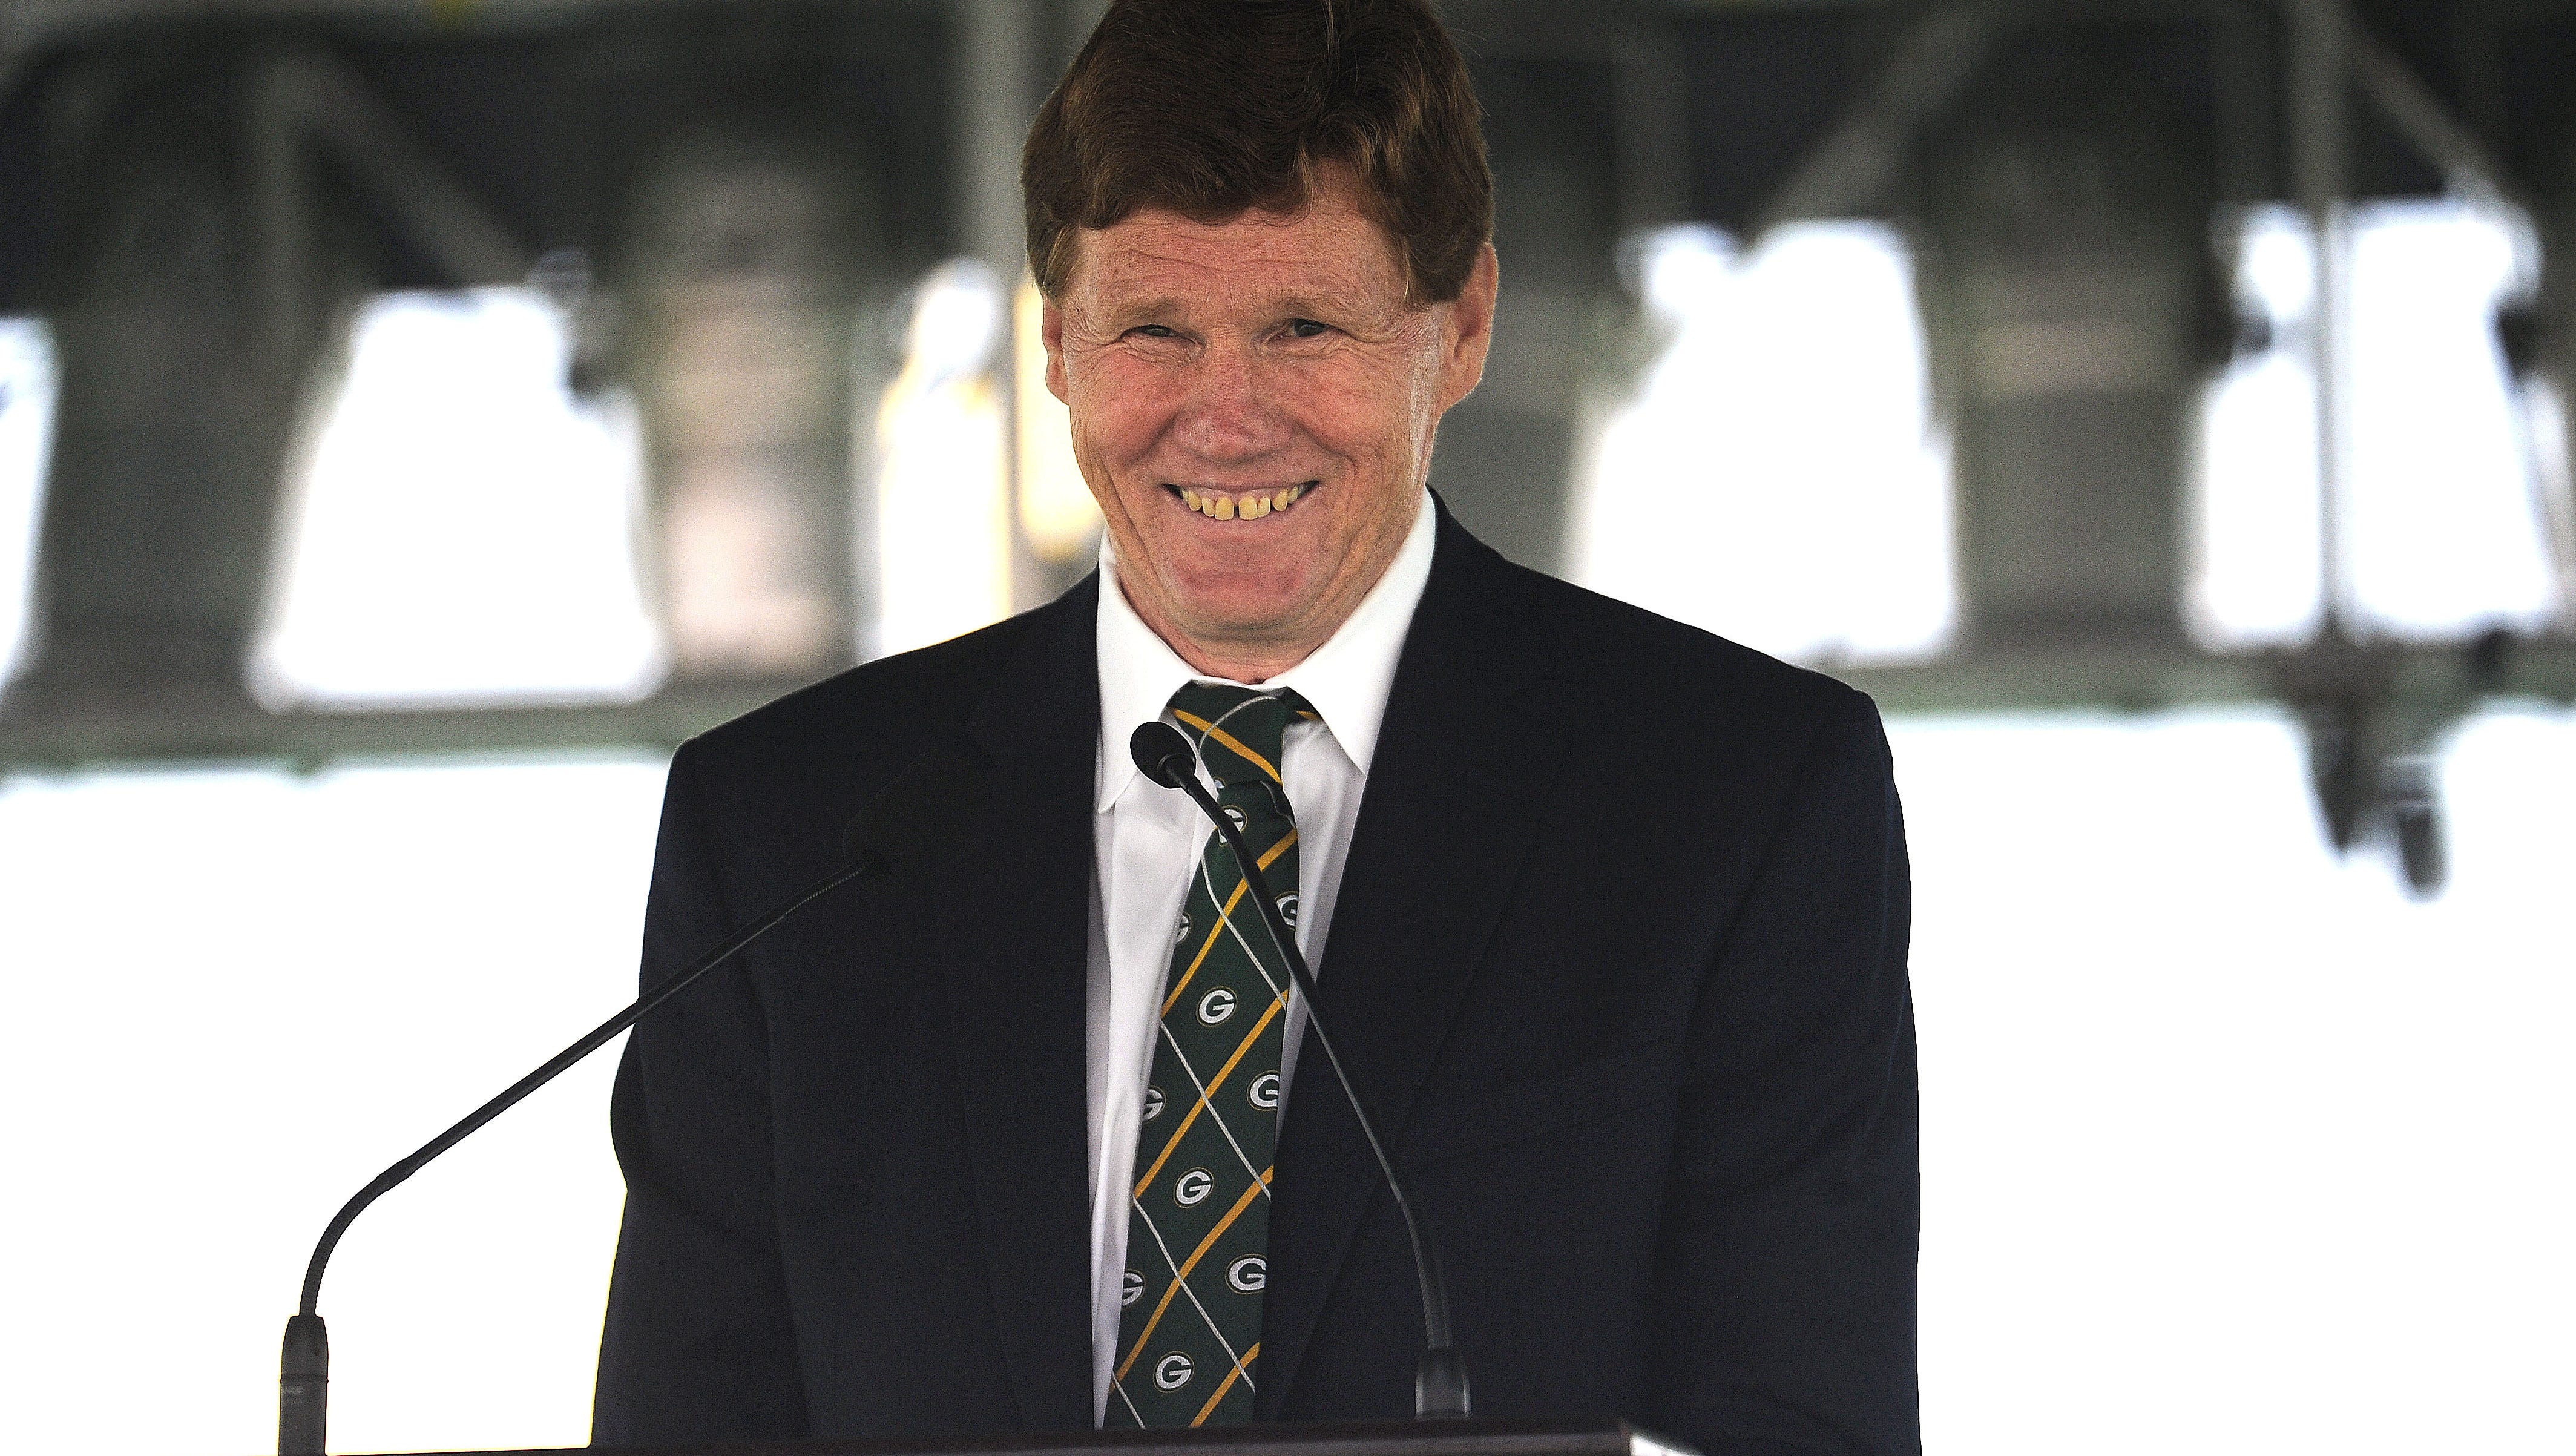 Green Bay Packers President and CEO Mark Murphy addresses shareholders gathered in Lambeau Field in July for the annual shareholders meeting.